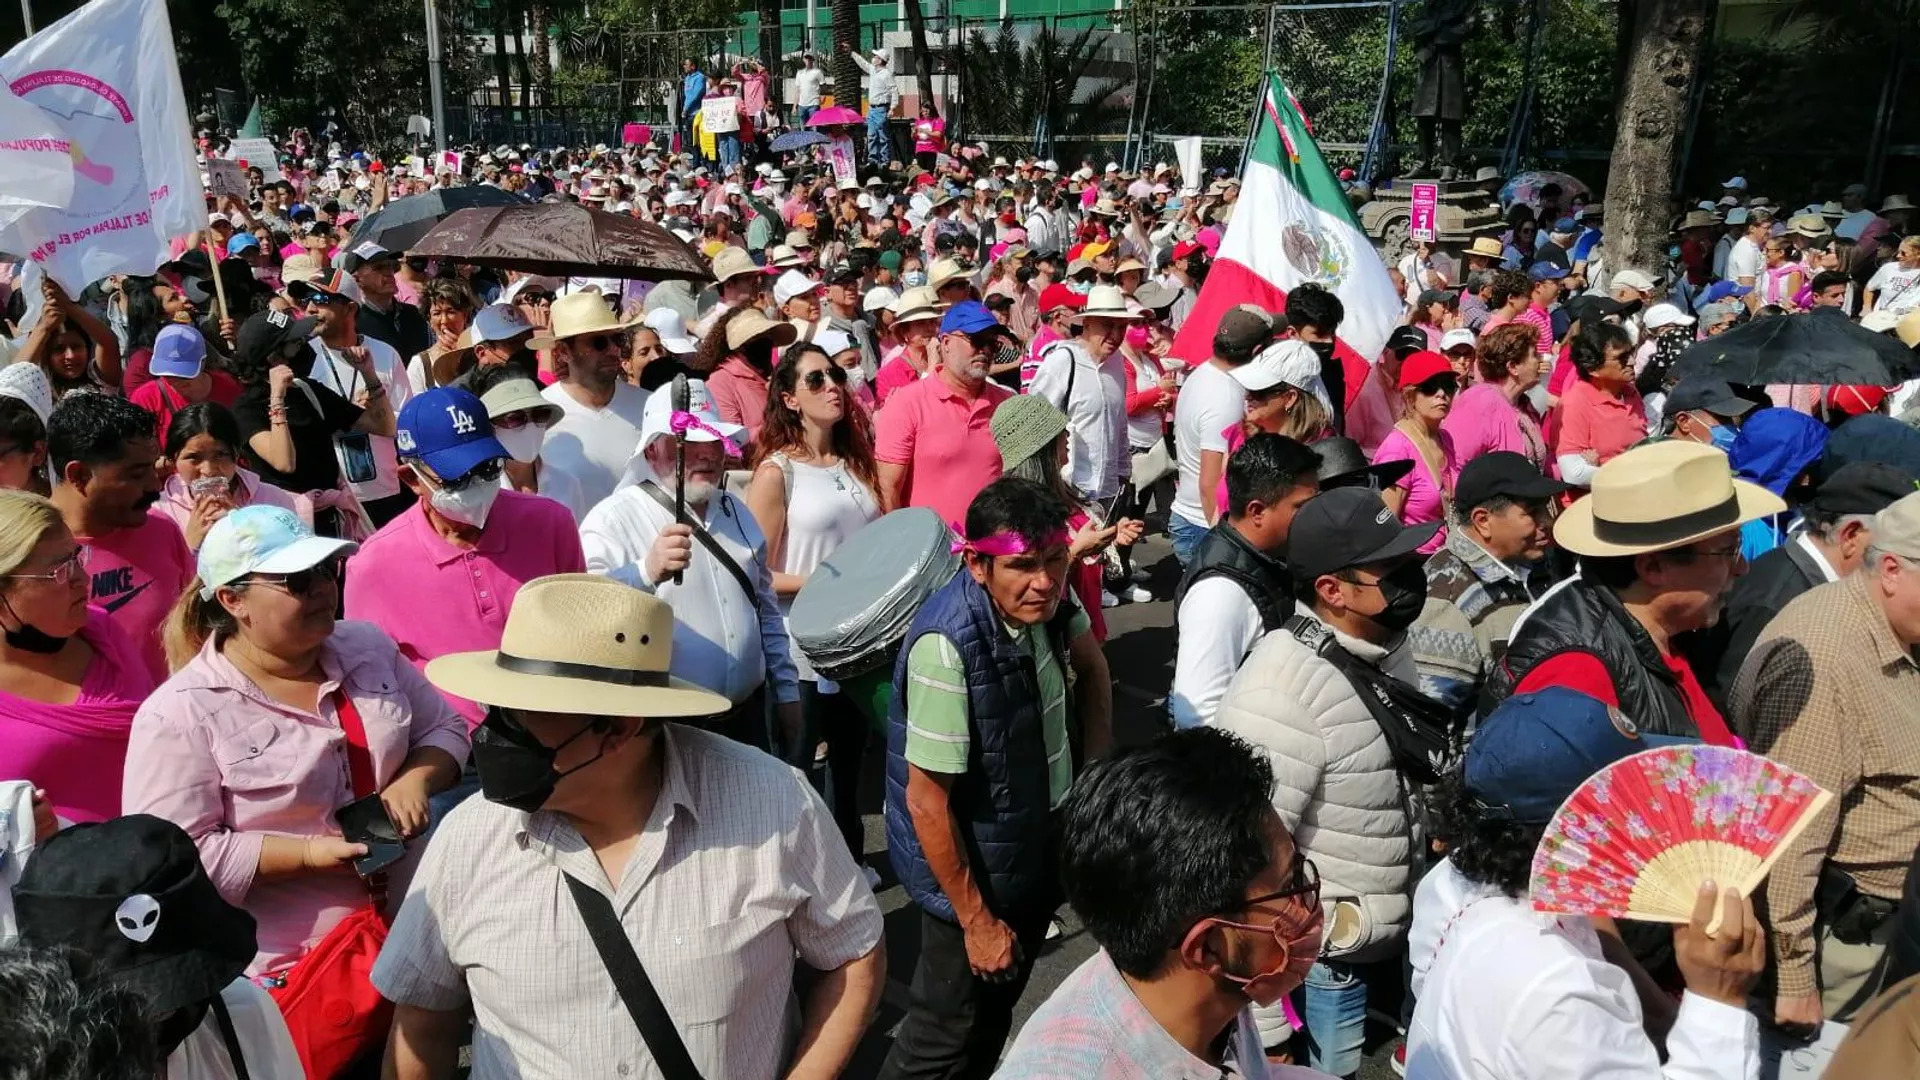 In Mexico, AMLO's opponents demonstrate against his electoral reforms. (Photo internet reproduction)